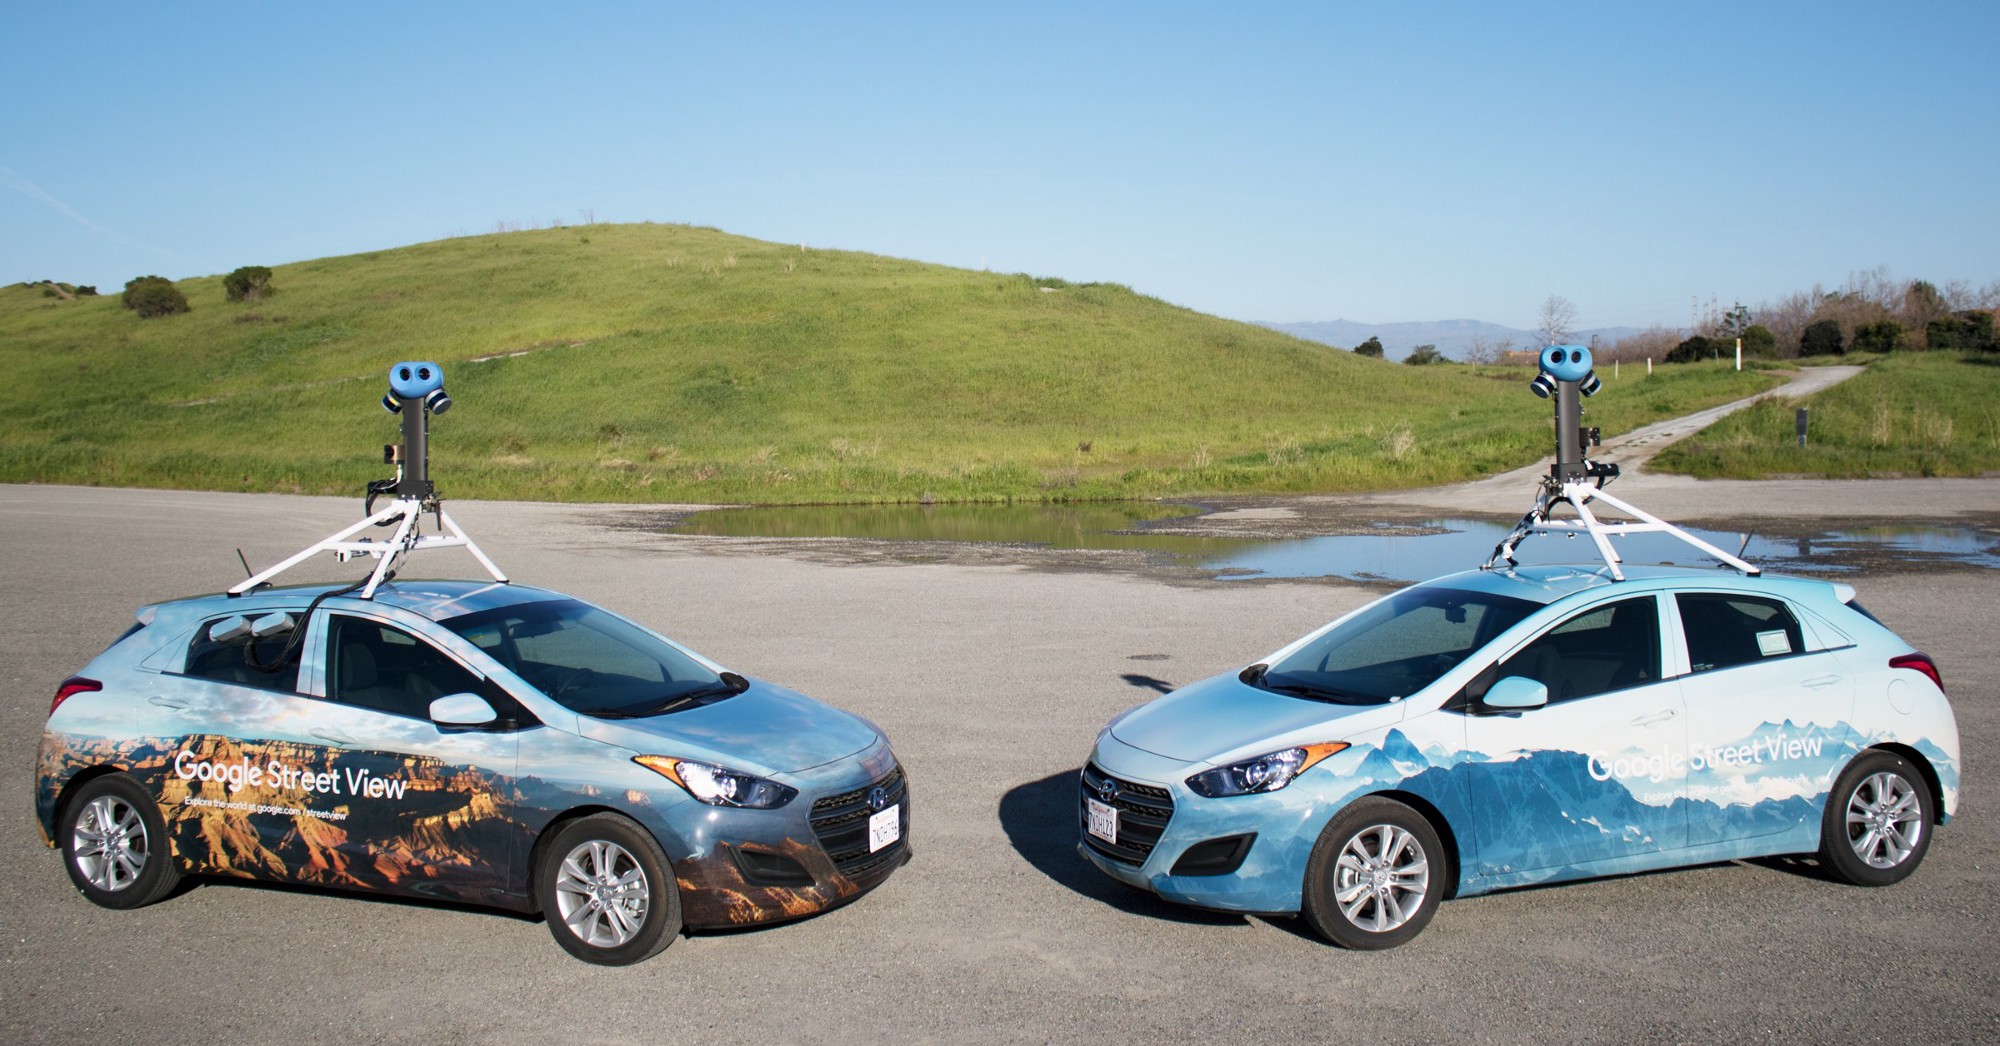 Google’s Street View cars are making streets viewable to more than just humans